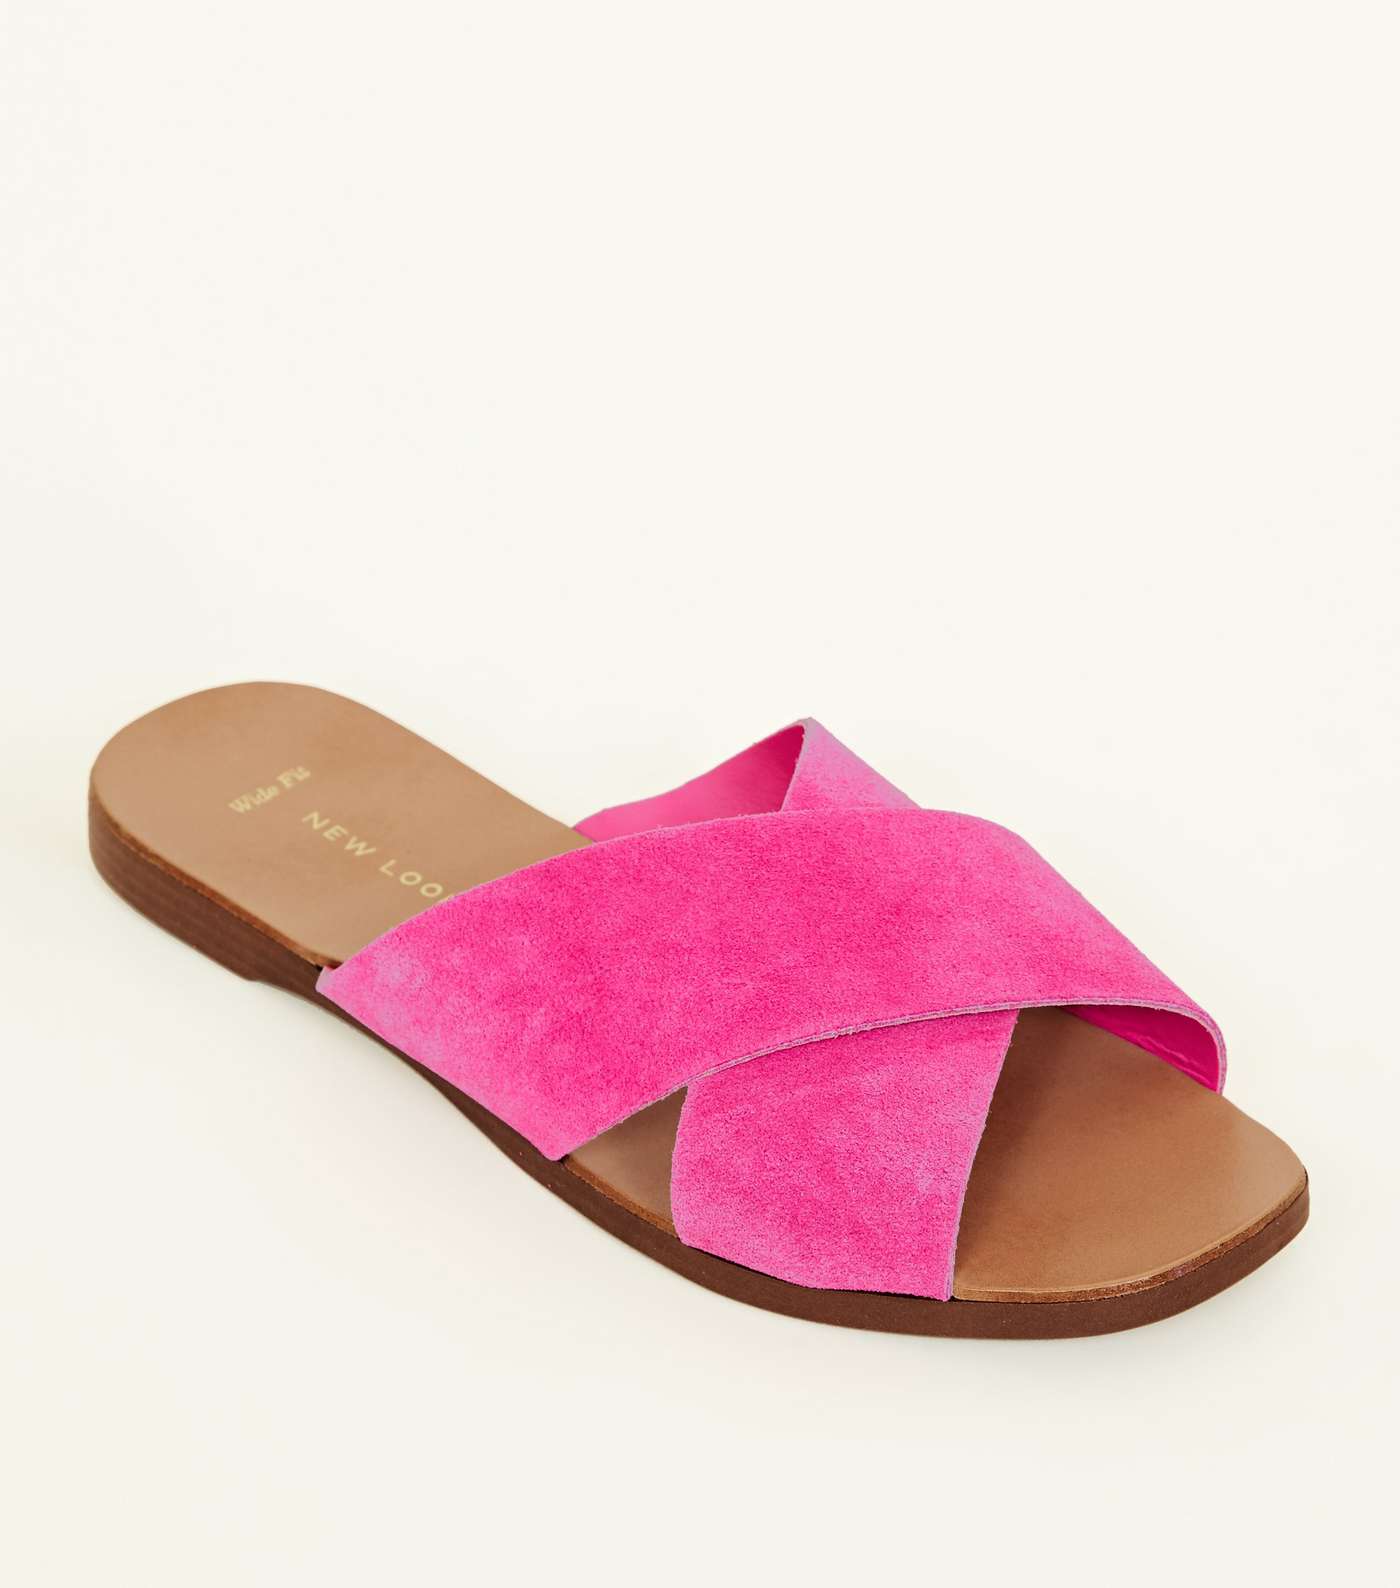 Wide Fit Bright Pink Suede Cross Strap Sliders